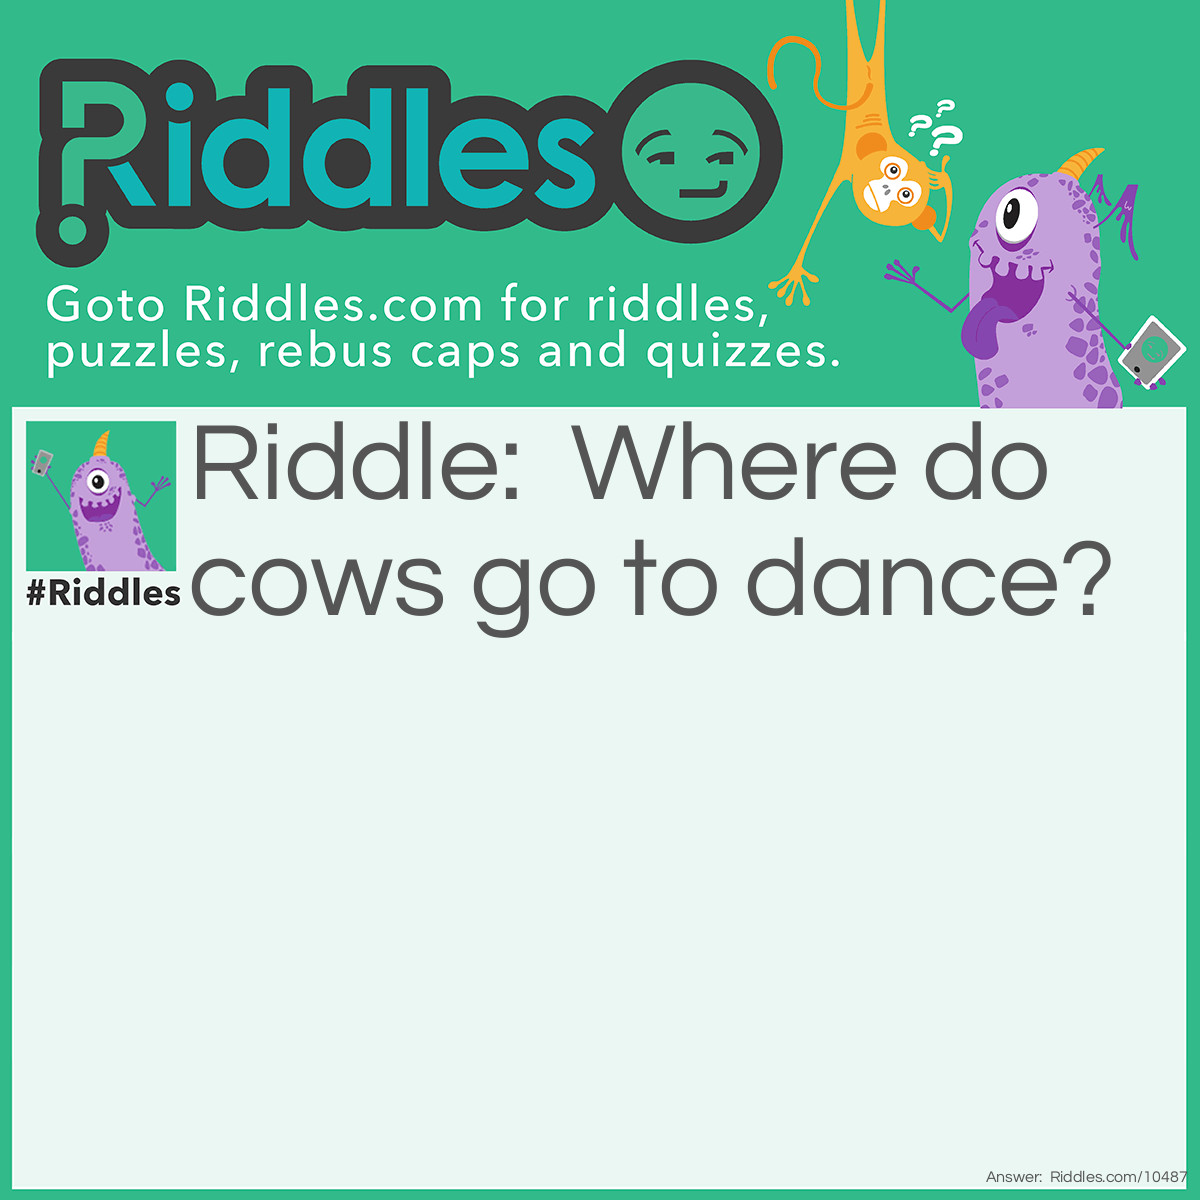 Riddle: Where do cows go to dance? Answer: At the discow.